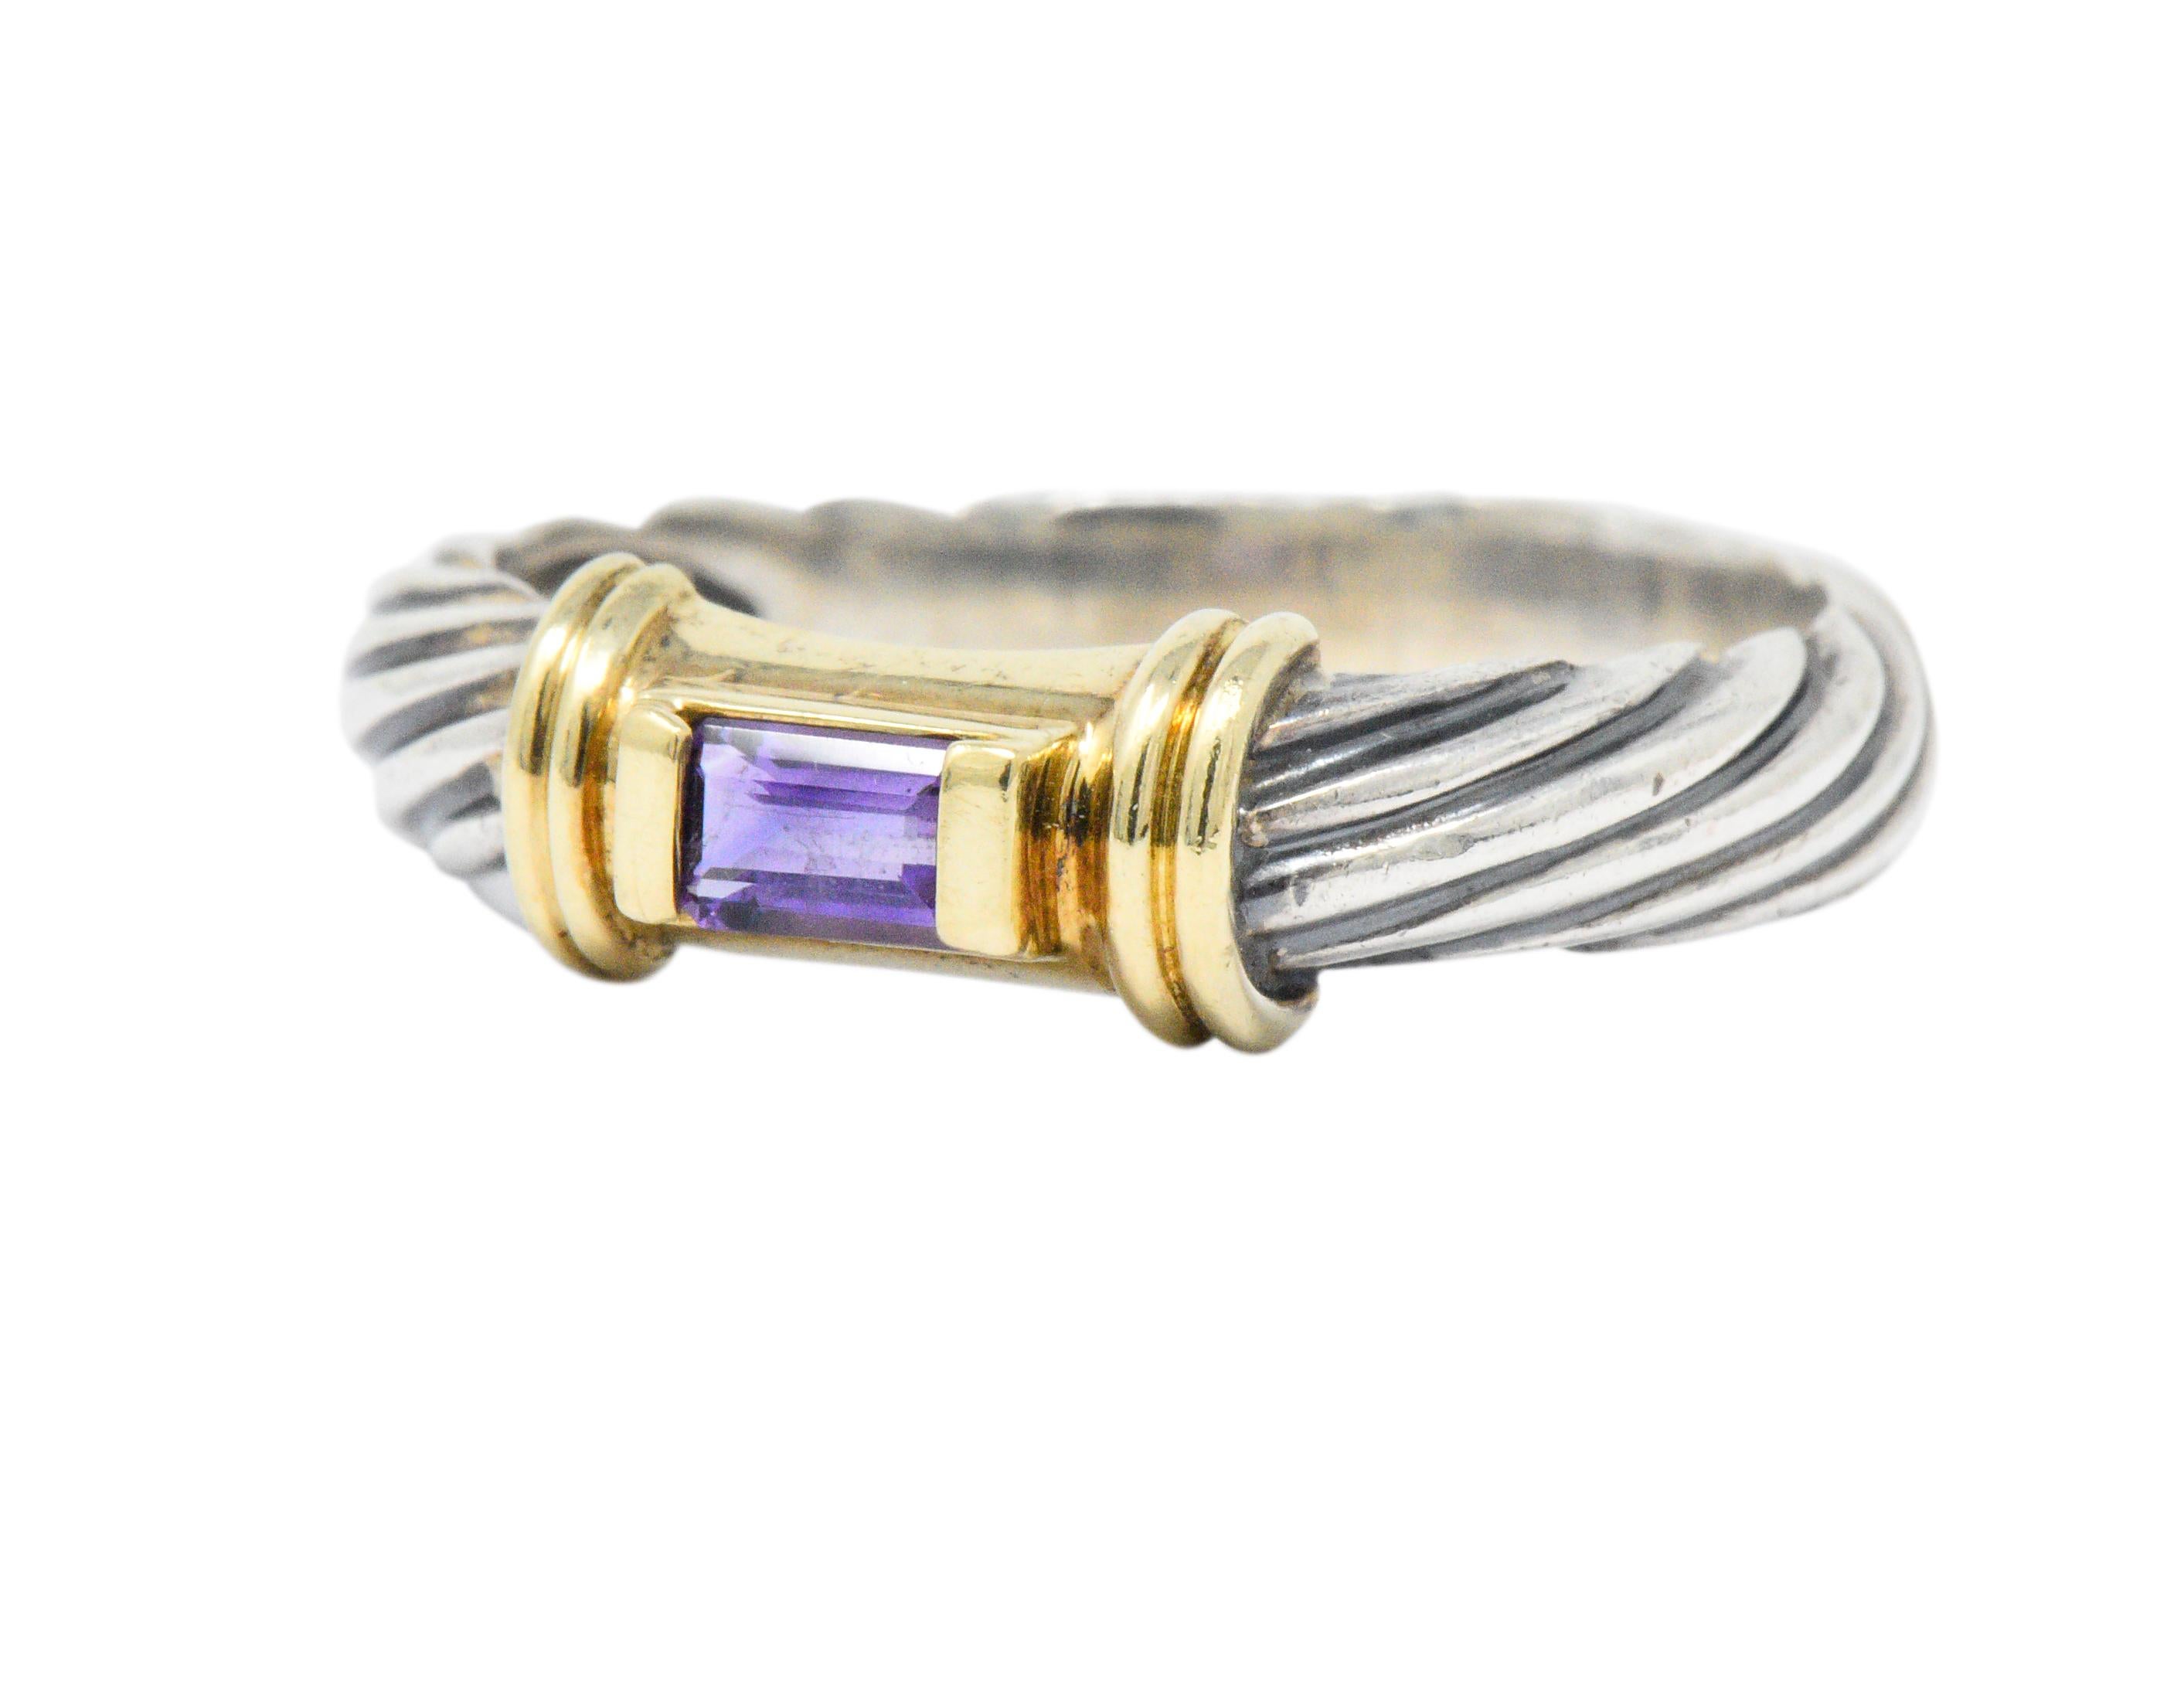 Centering an emerald cut amethyst deep violet purple

Elongated 14k yellow gold prongs on each end with ribbed accents

Classic David Yurman cable twist band

Signed Yurman Sterling and from the Metro collection

Top measures 5 mm wide and sits 4 mm